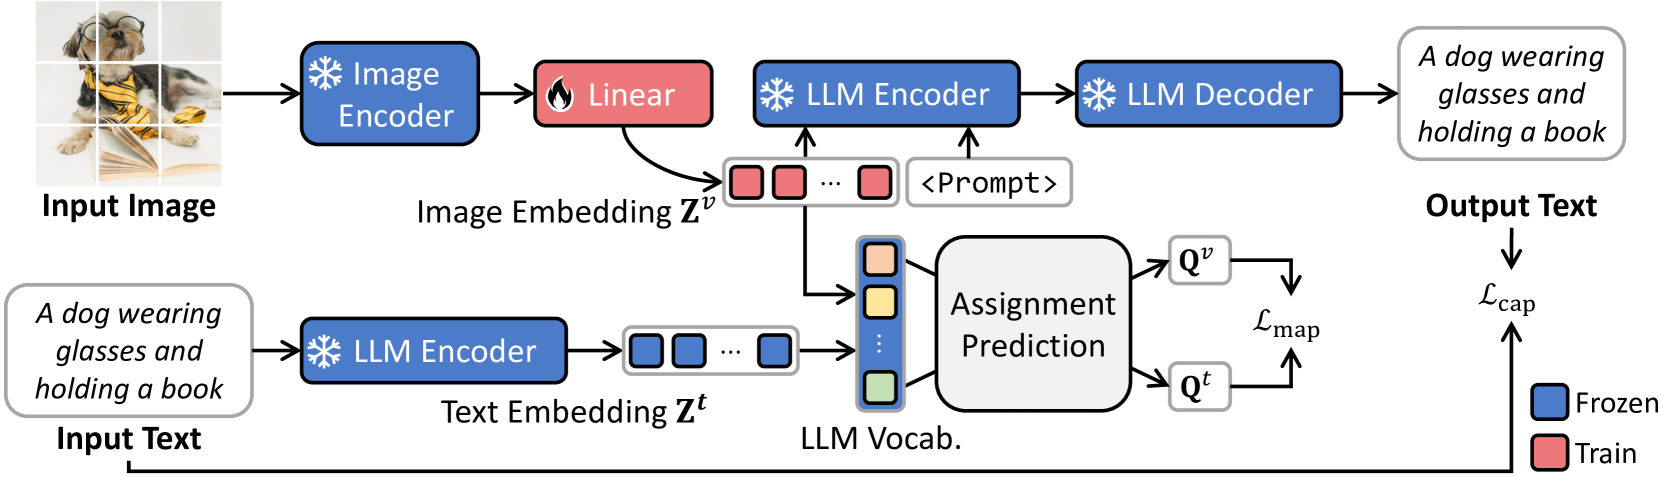 Bridging Vision and Language Spaces with Assignment Prediction